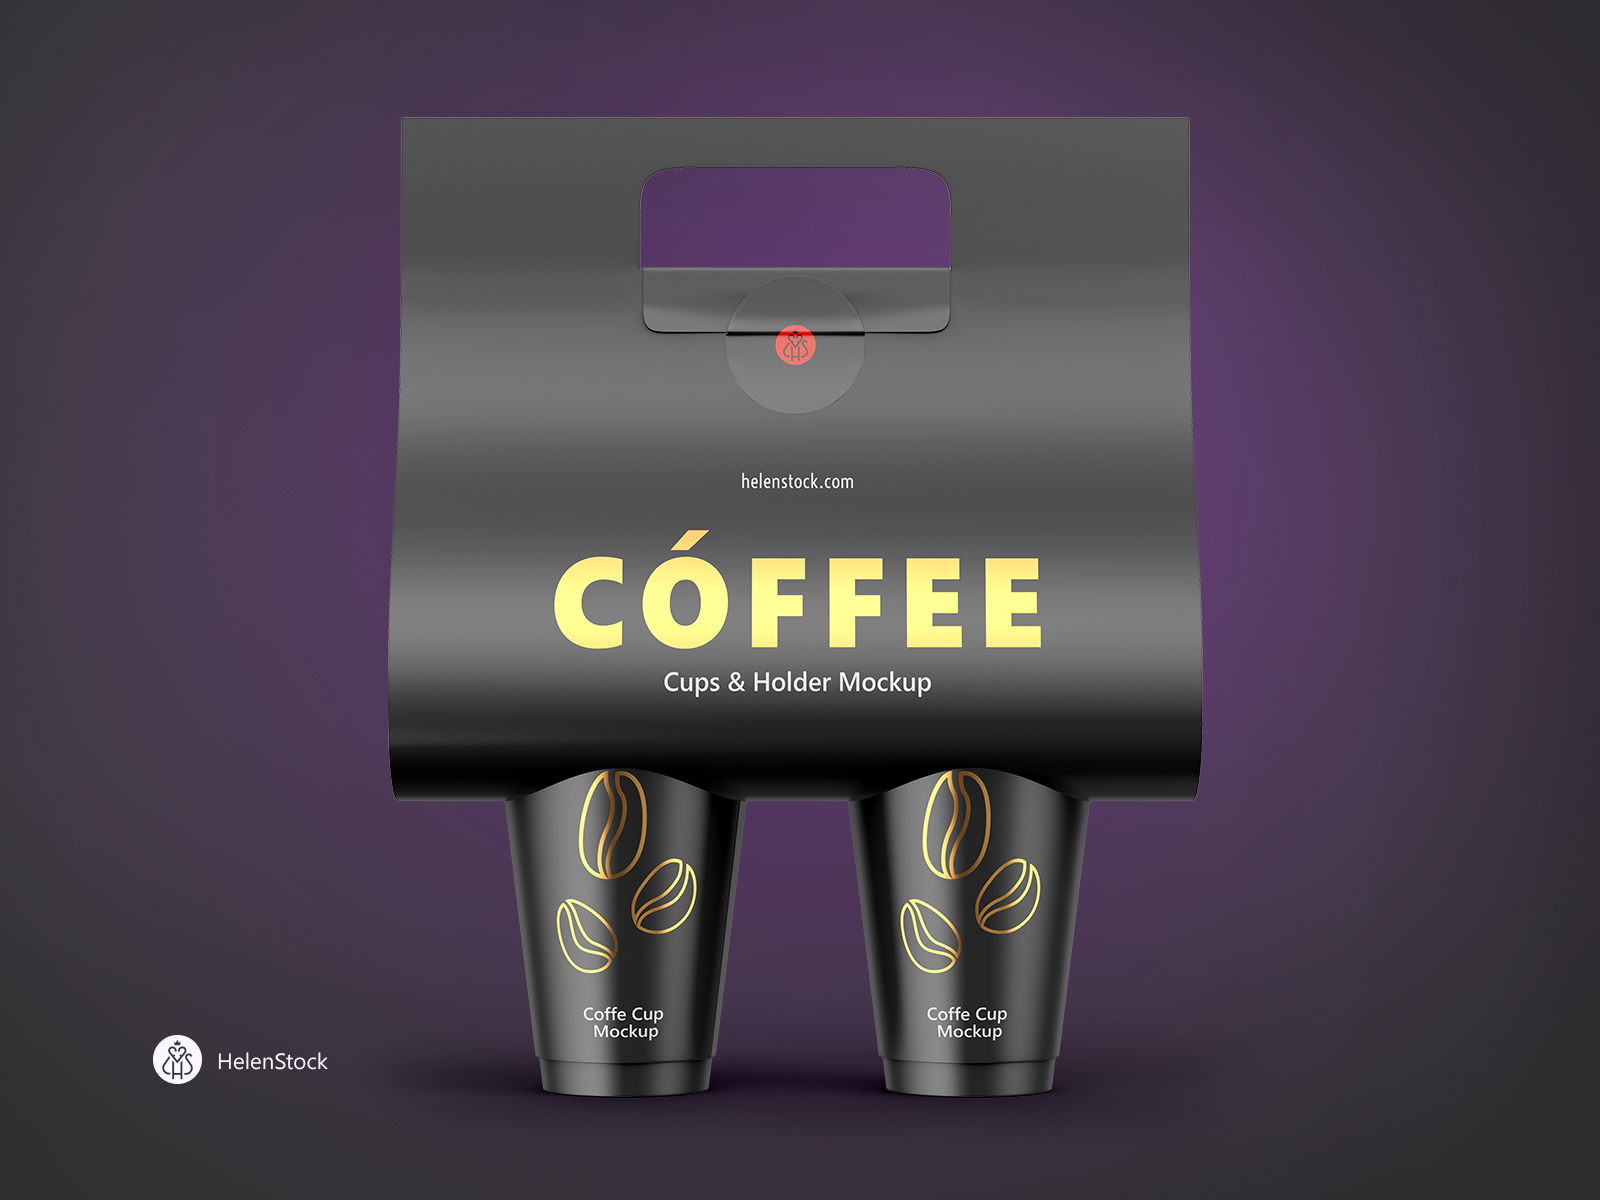 Coffee Cups and Holder Mockups - Front View by HelenStock on Dribbble